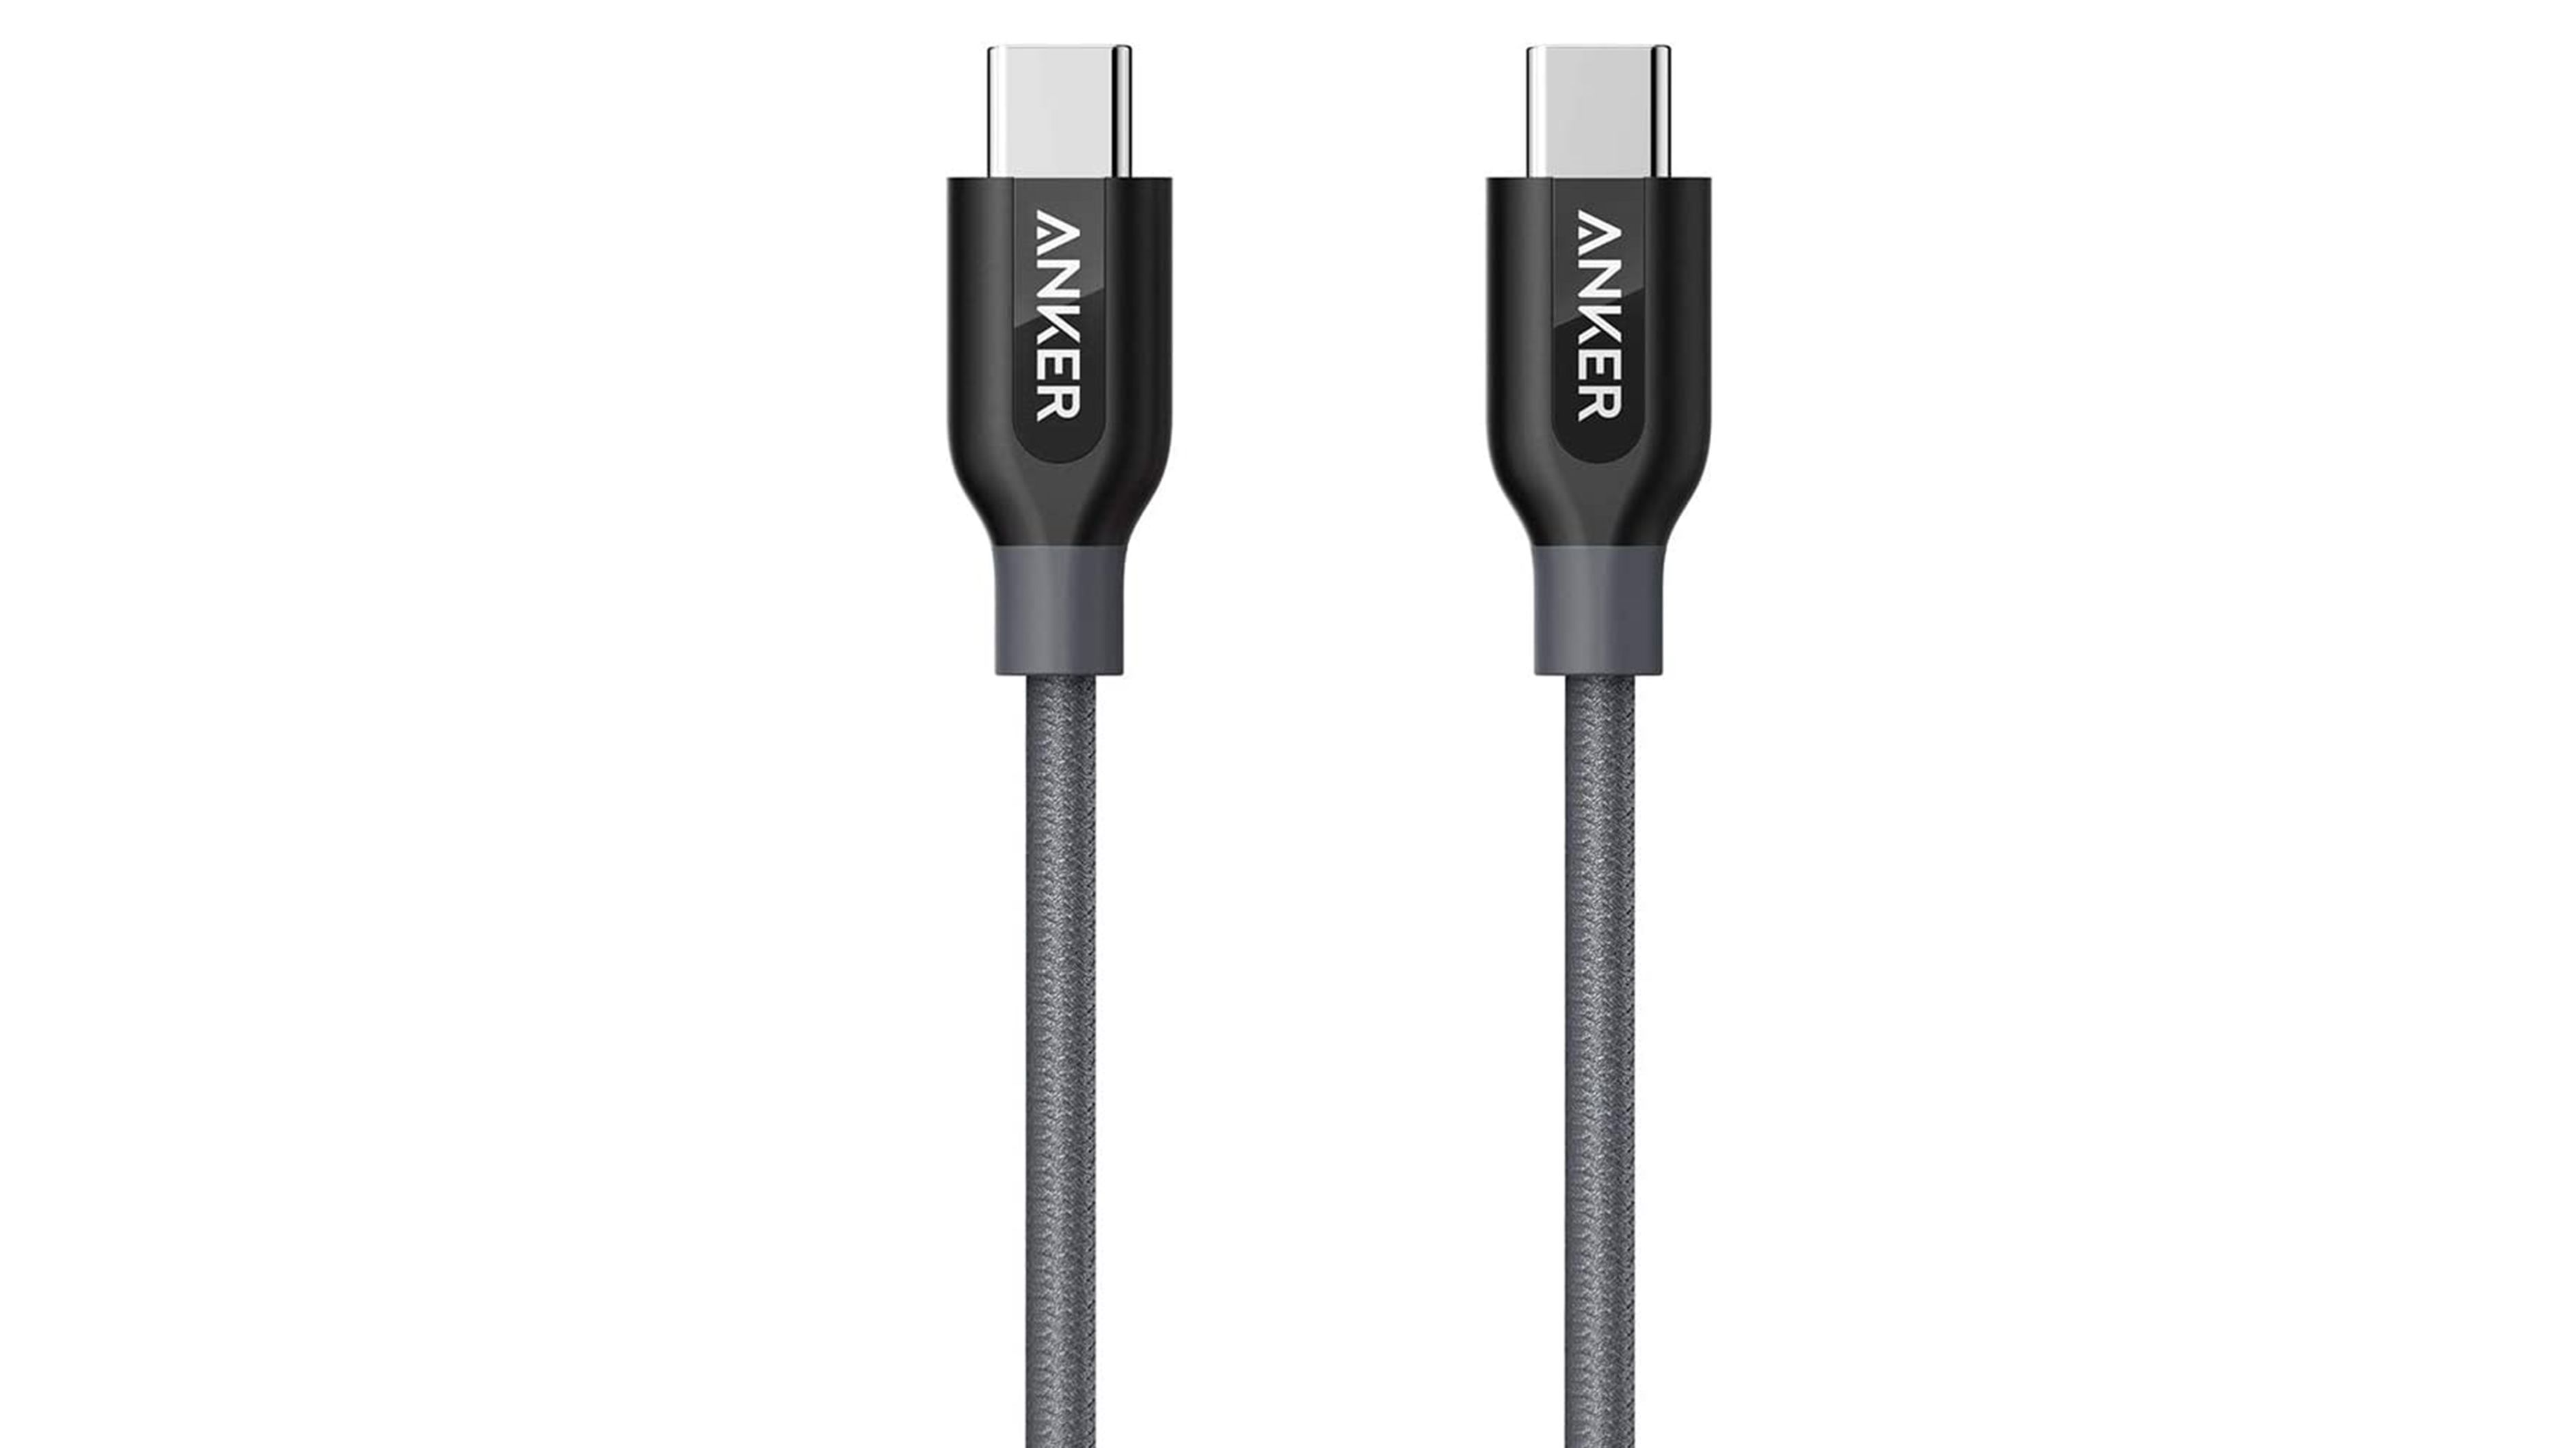 The best USB-C to Lightning cables released so far